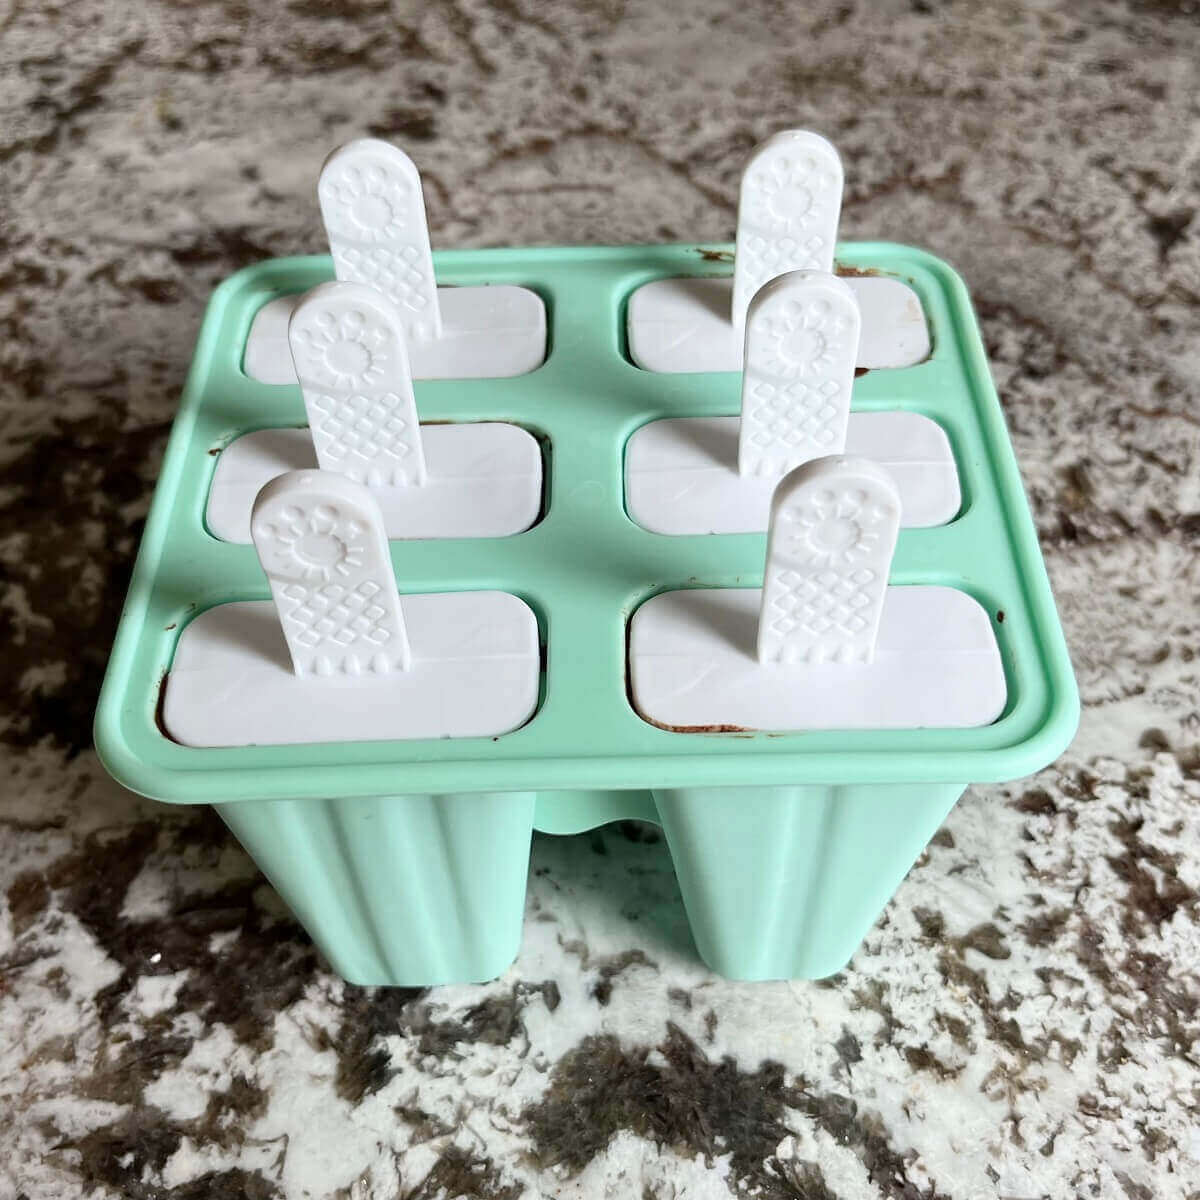 A turquoise popsicle mold on a granite counter.